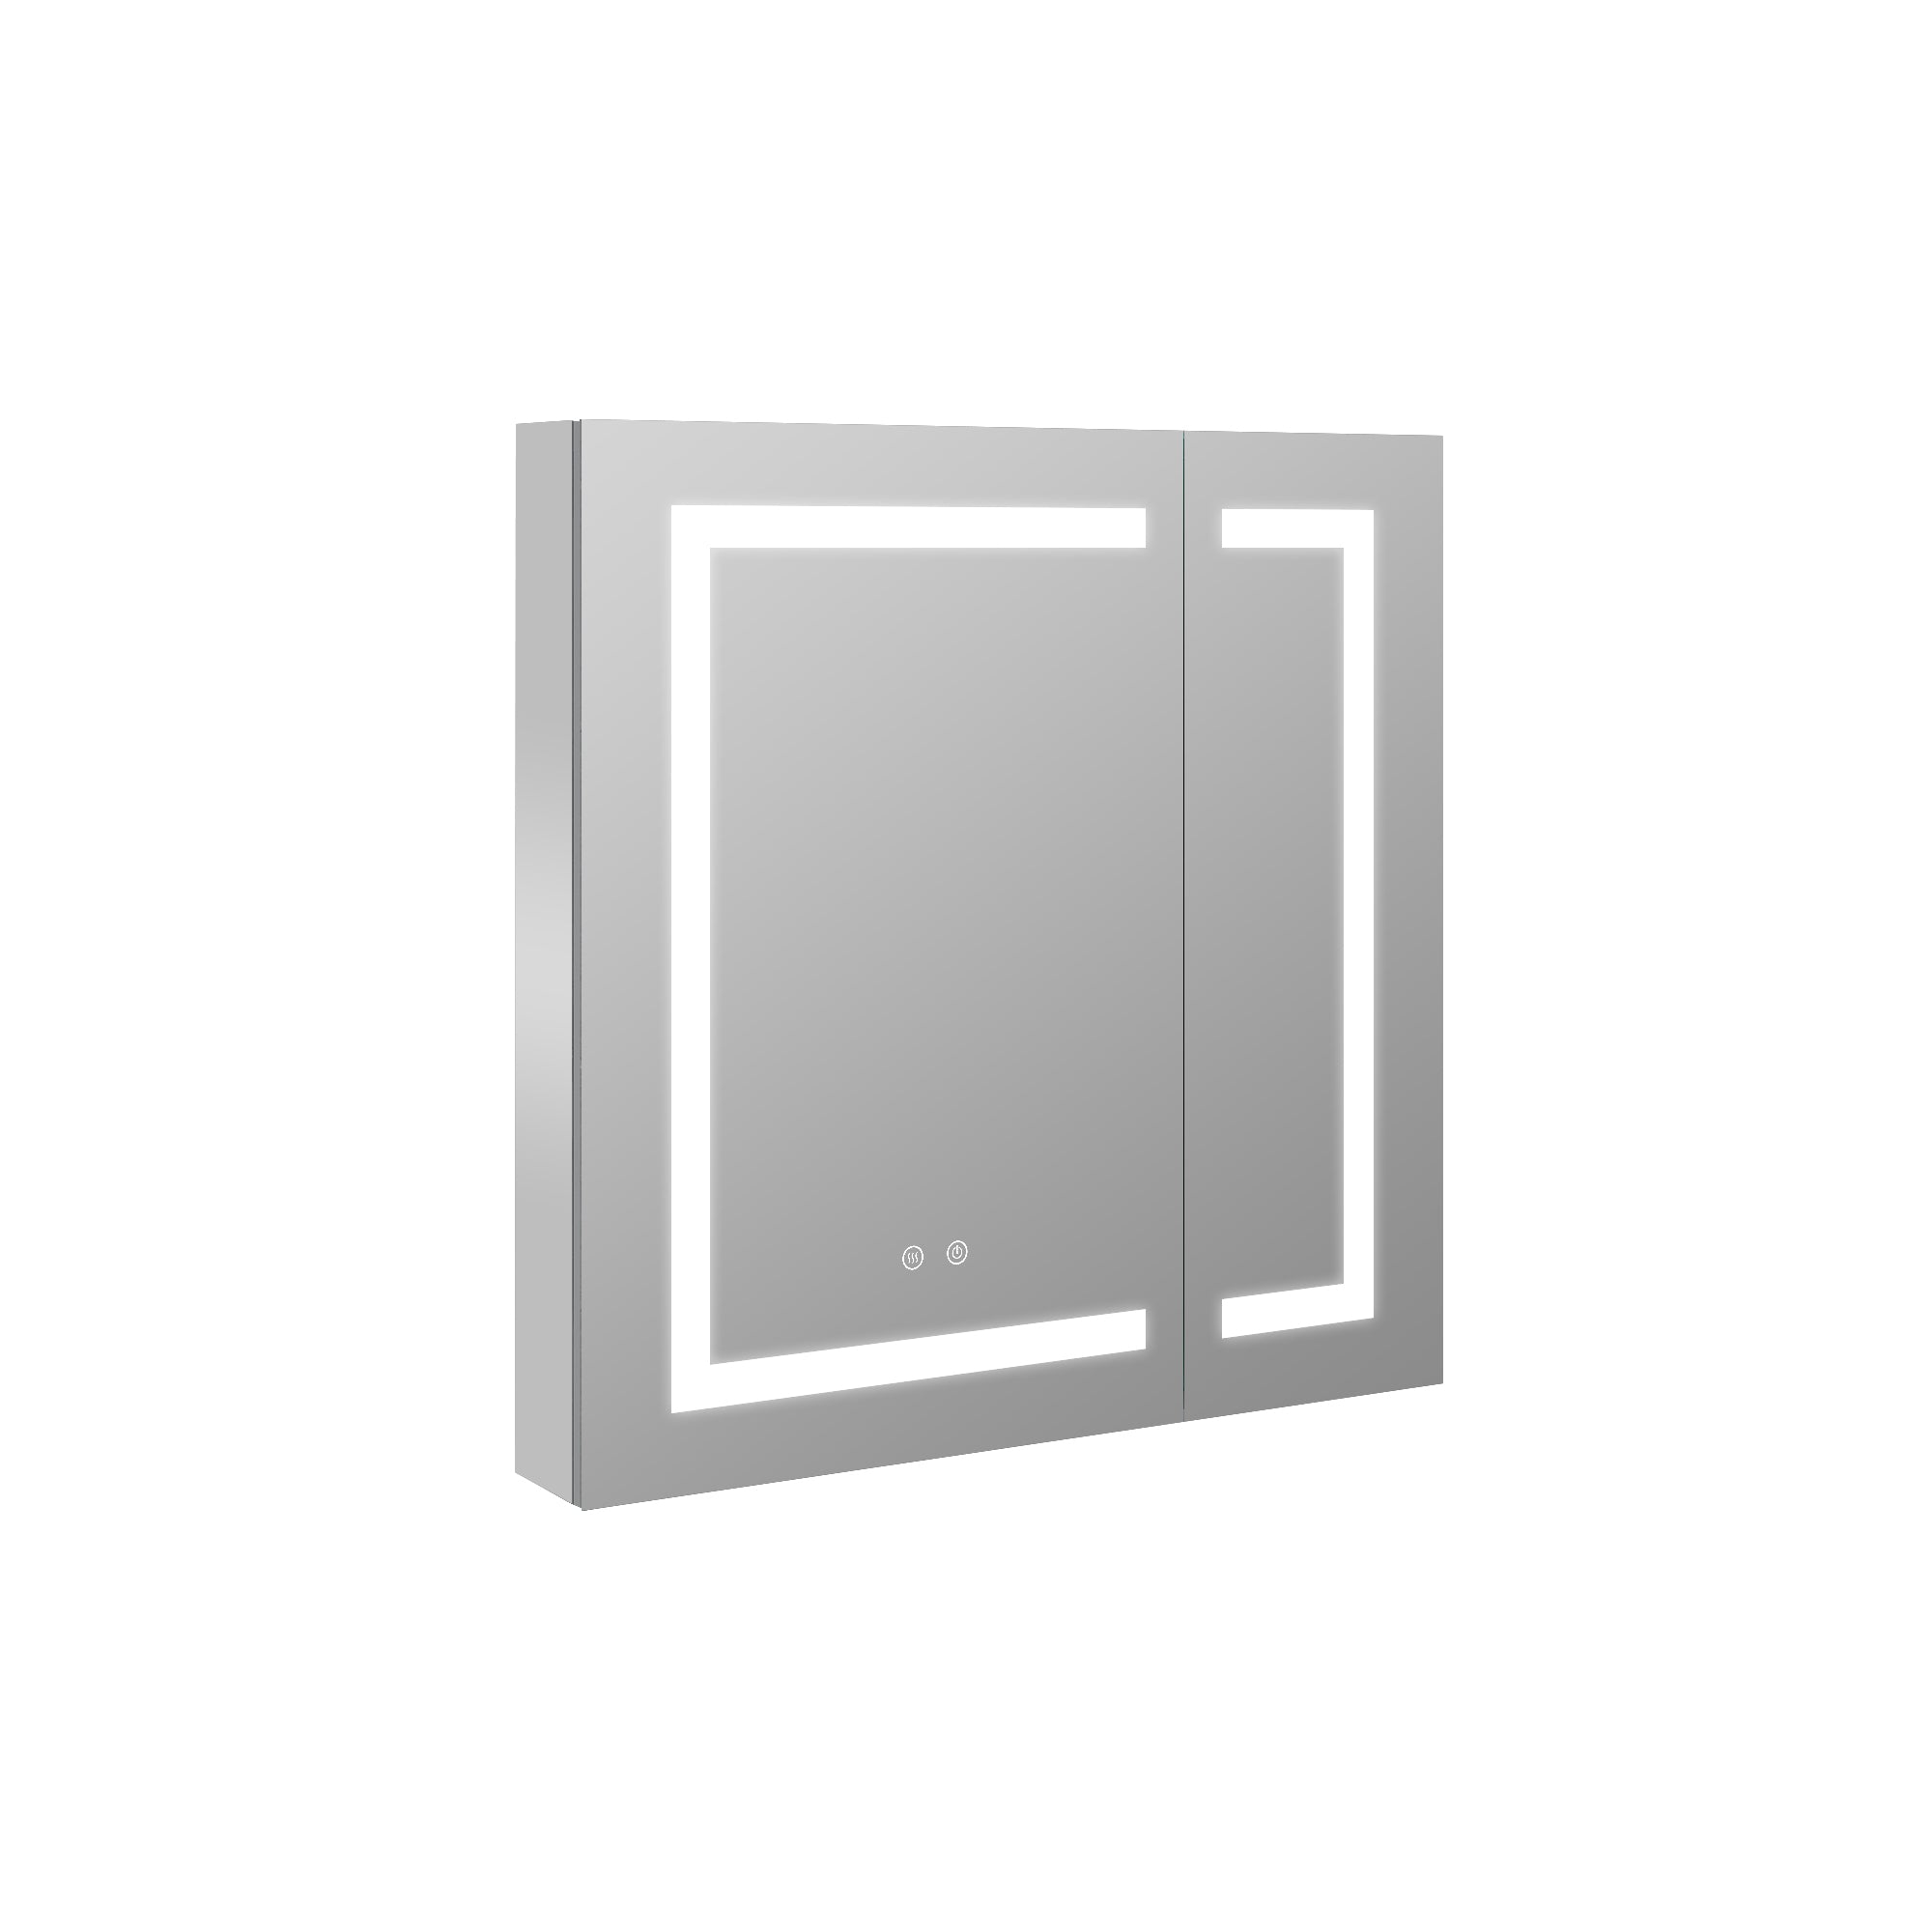 30 in. x 30 in. Lighted LED Surface/Recessed Mount Mirror Rectangle Bathroom Medicine Cabinet with Outlet